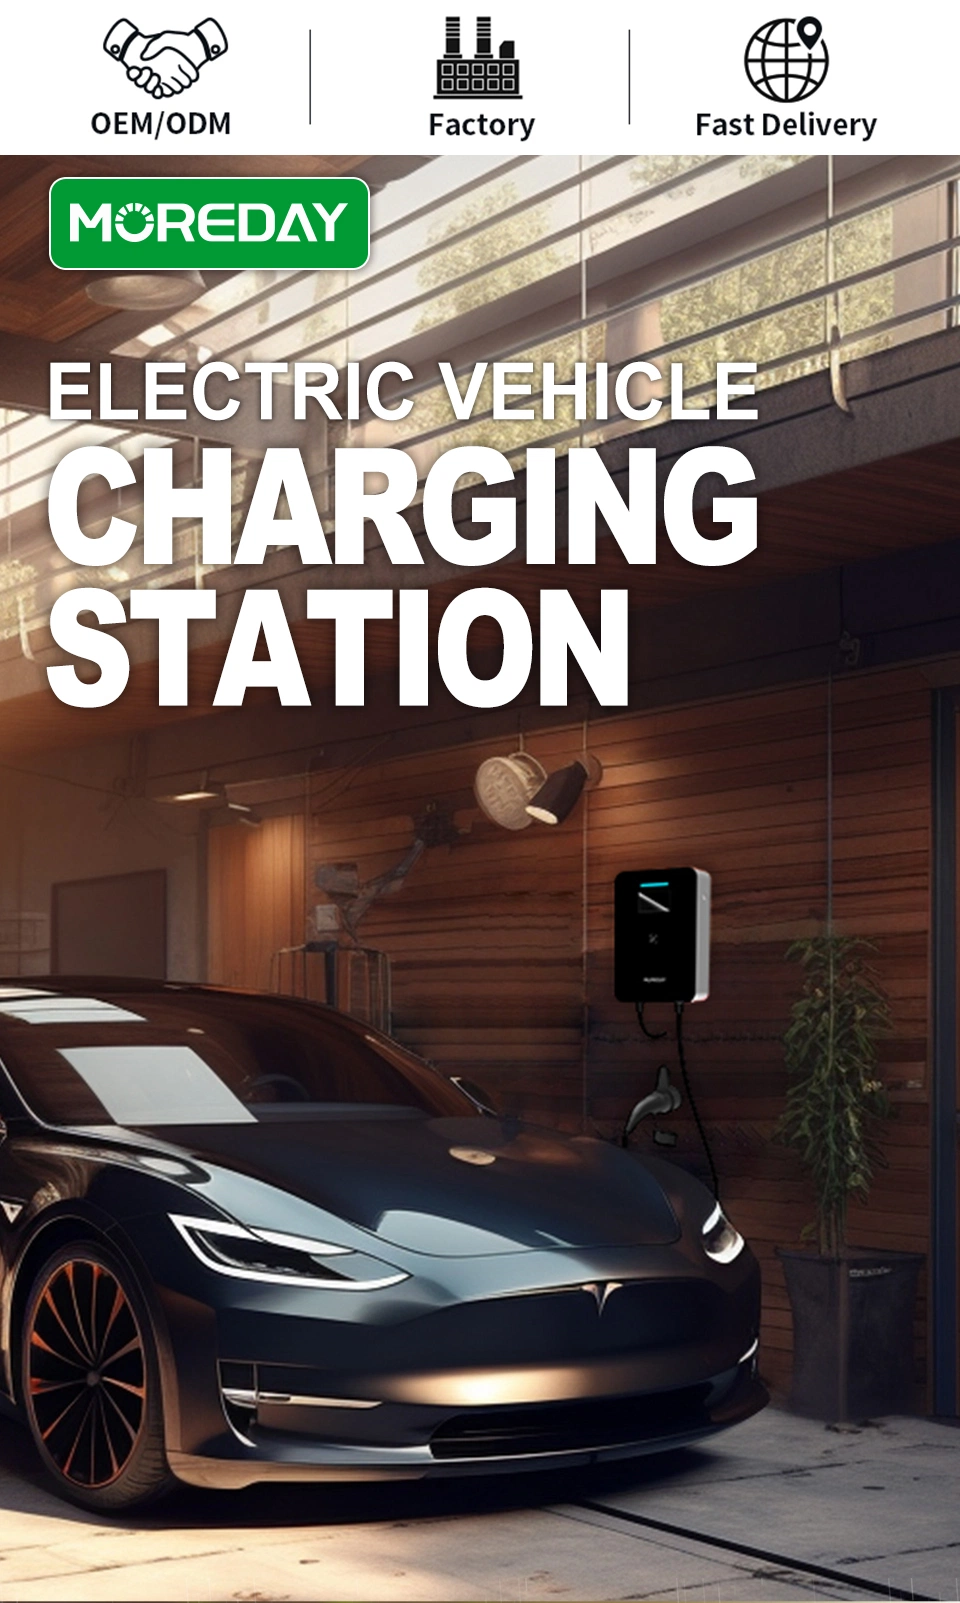 EV Charger Level 2, 48A 240V 11.5kw Smart Electric Vehicle Charger with NEMA 14-50p, 25FT-Cable ETL UL Listed Indoor/Outdoor Car Charging Station with APP